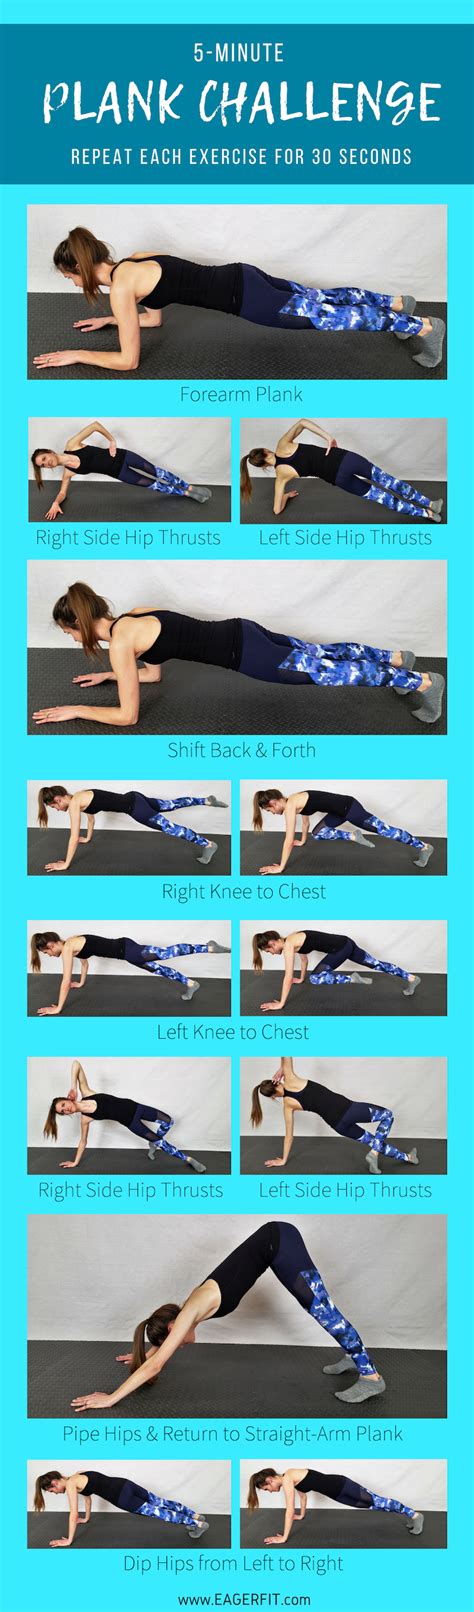 5 Minute Plank Challenge Plank Challenge Heath And Fitness Exercise